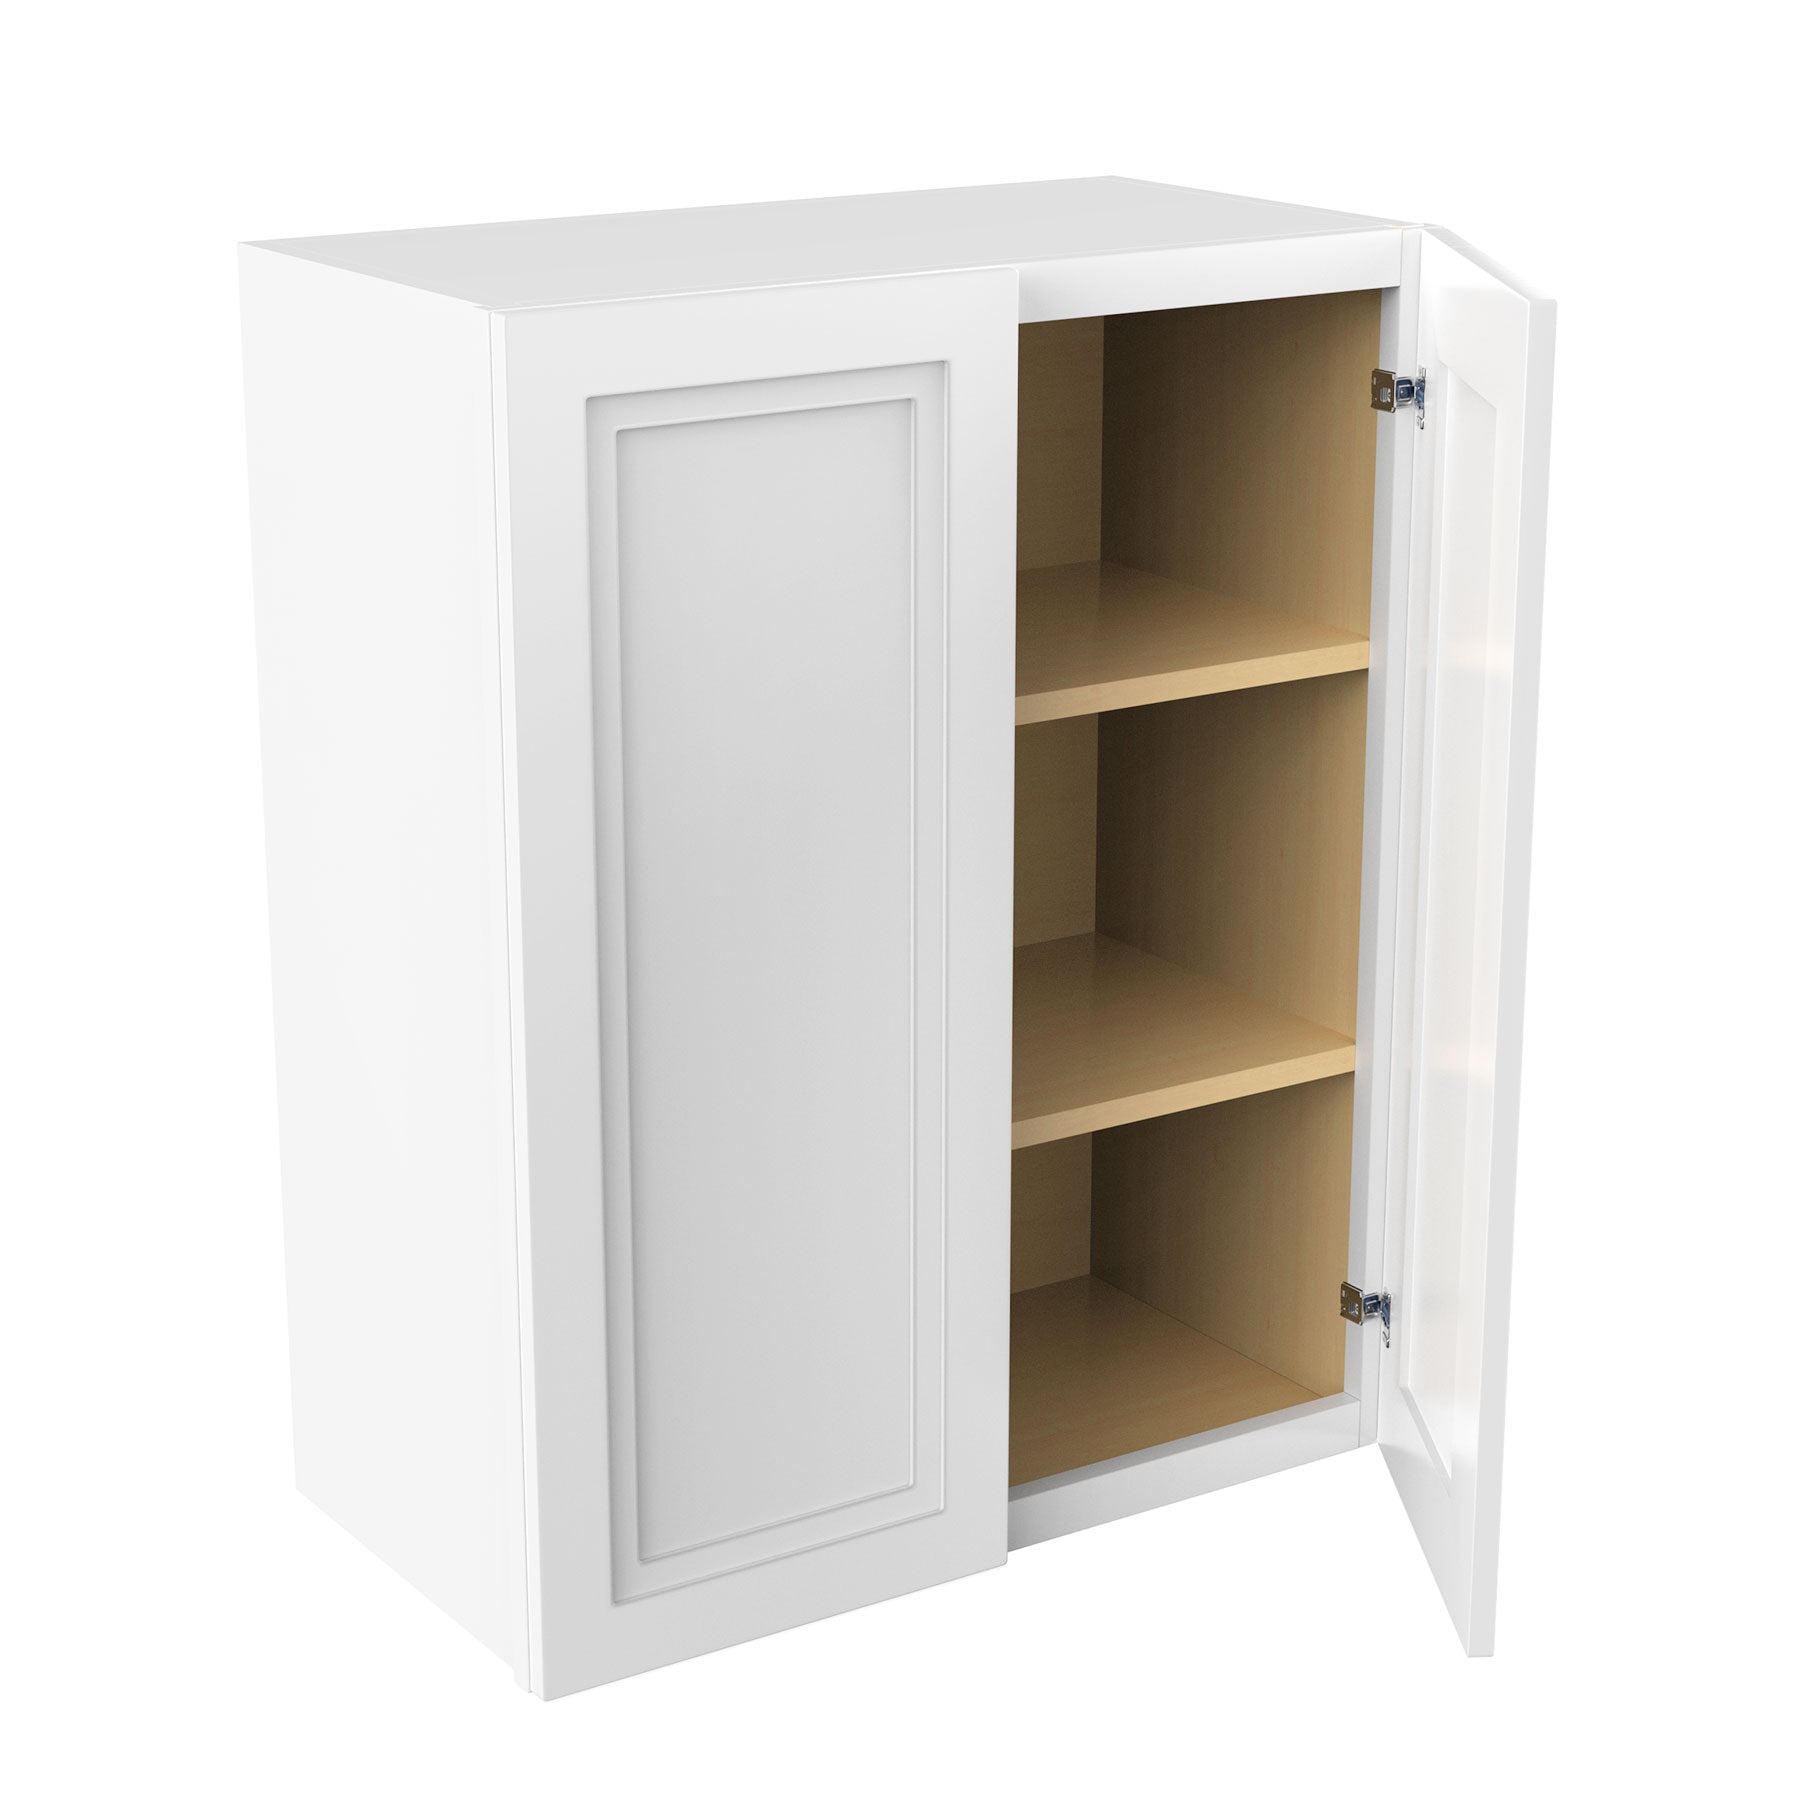 RTA - Fashion White - 30" High Double Door Wall Cabinet | 24"W x 30"H x 12"D